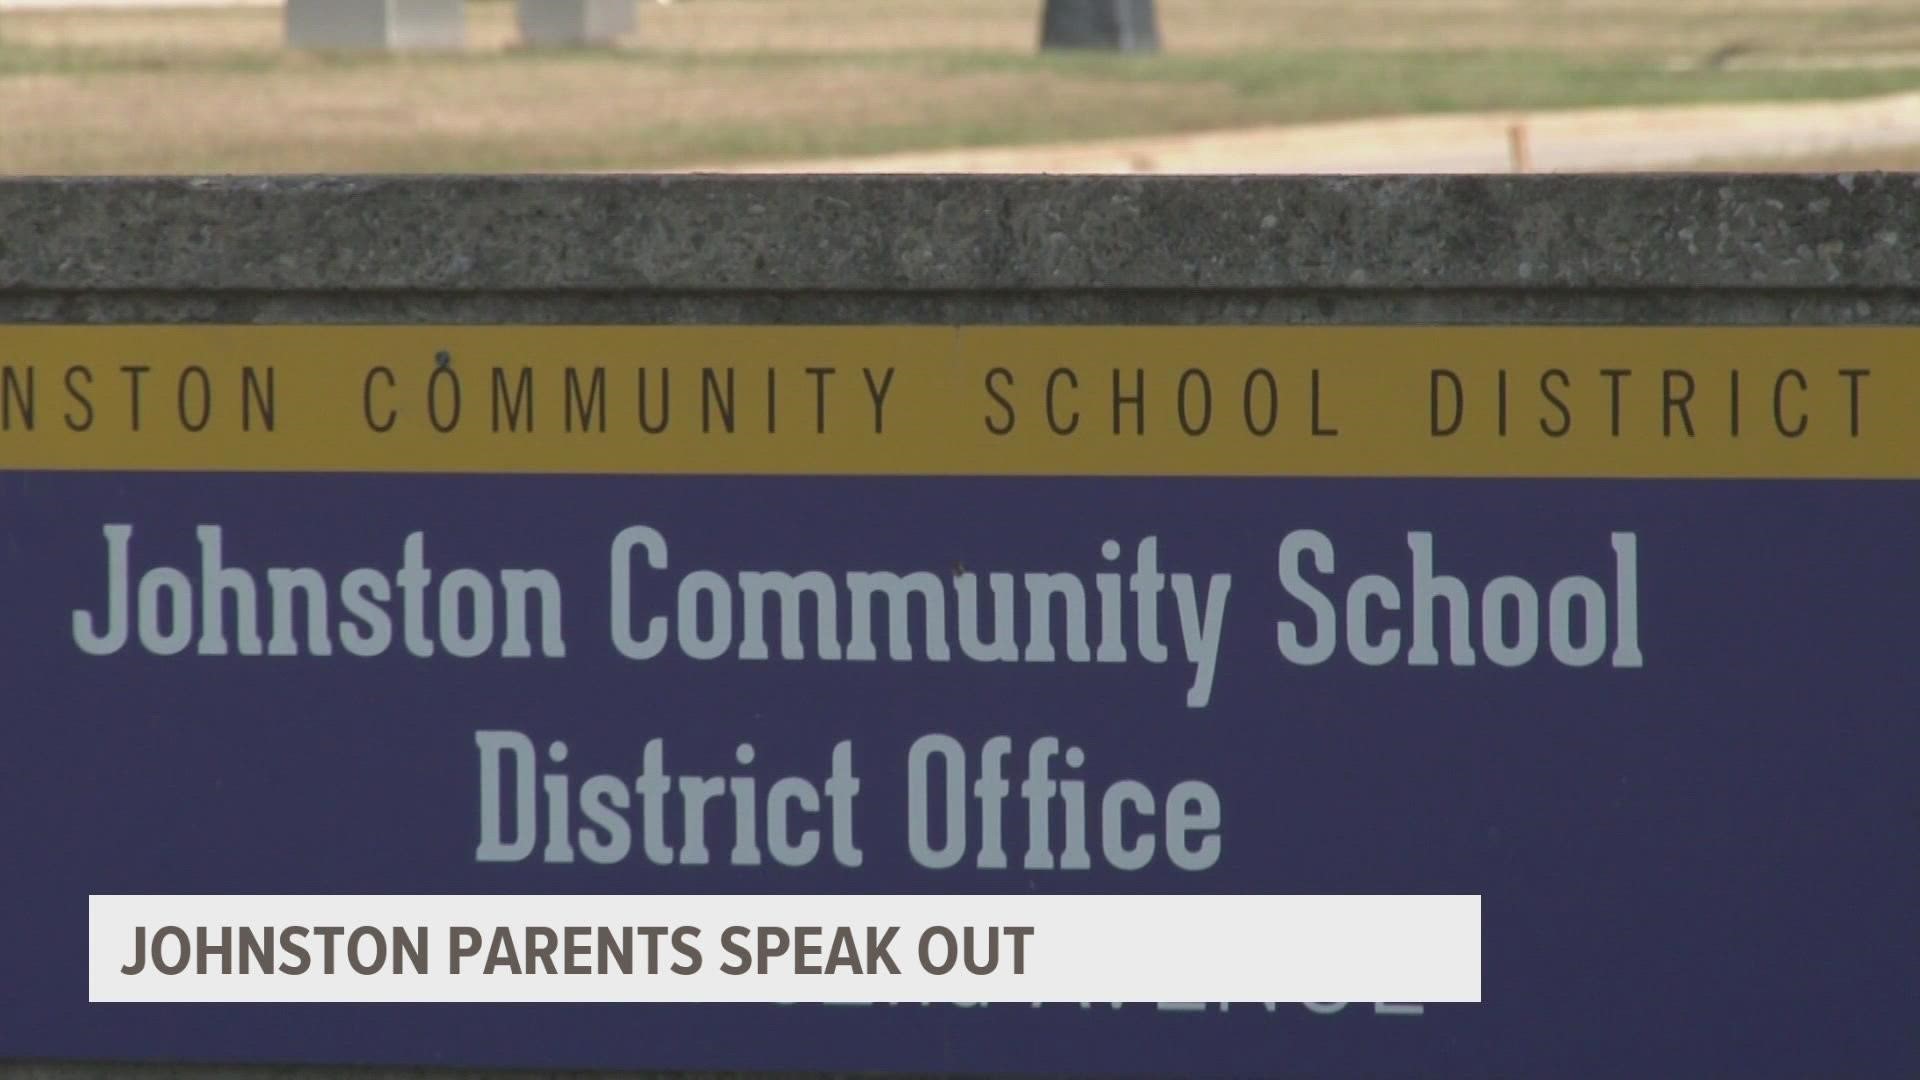 The Johnston Community School District says both incidents at Summit Middle School were investigated, and there was no credible threat.